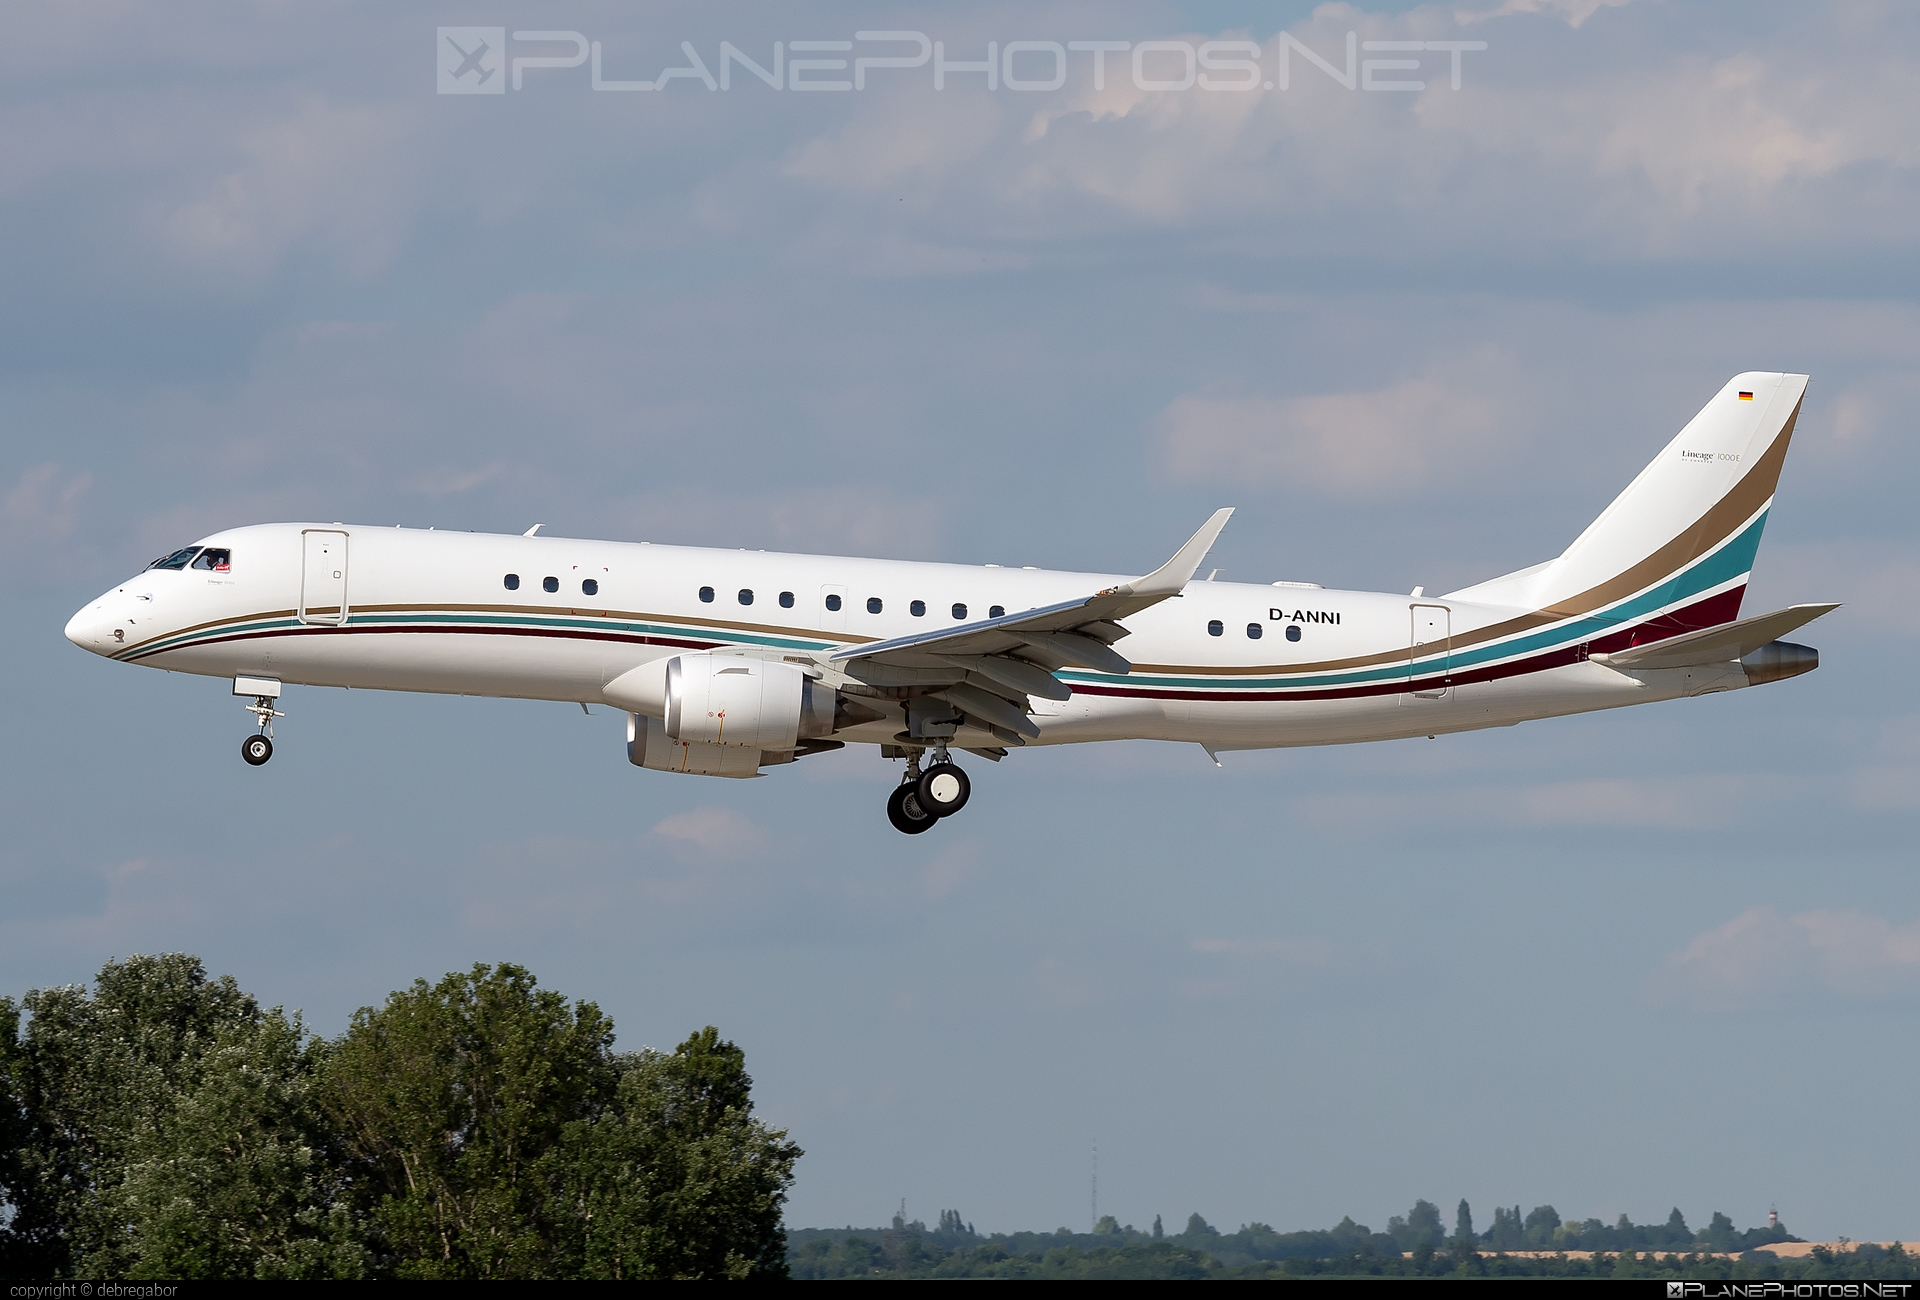 Embraer Lineage 1000 (ERJ-190-100ECJ) - D-ANNI operated by AIR HAMBURG #embraer #embraerlineage #embraerlineage1000 #lineage1000